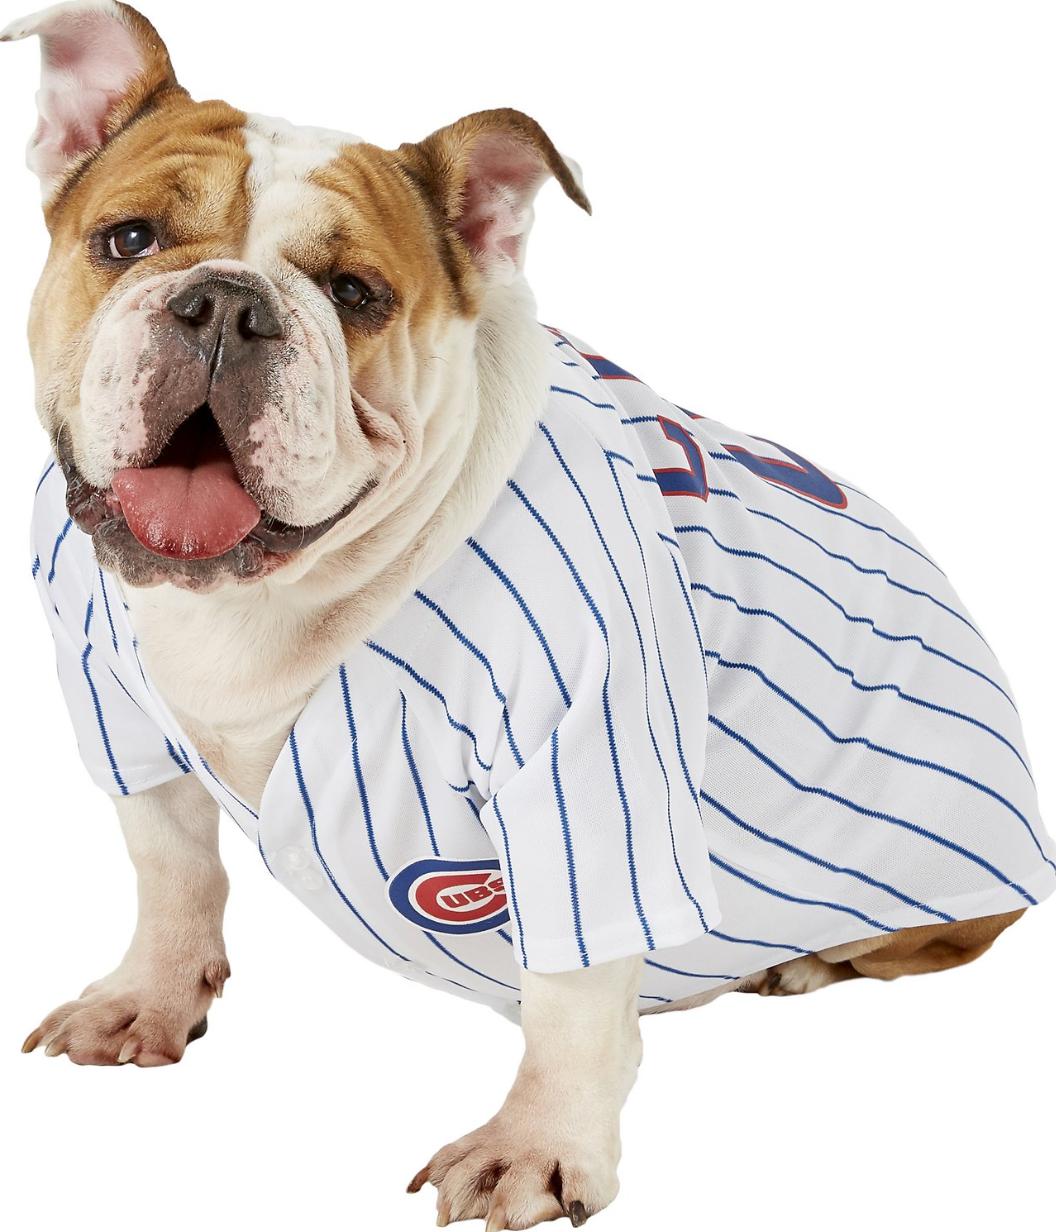 Chicago Cubs Dog Jersey  Chicago Cubs Merchandise